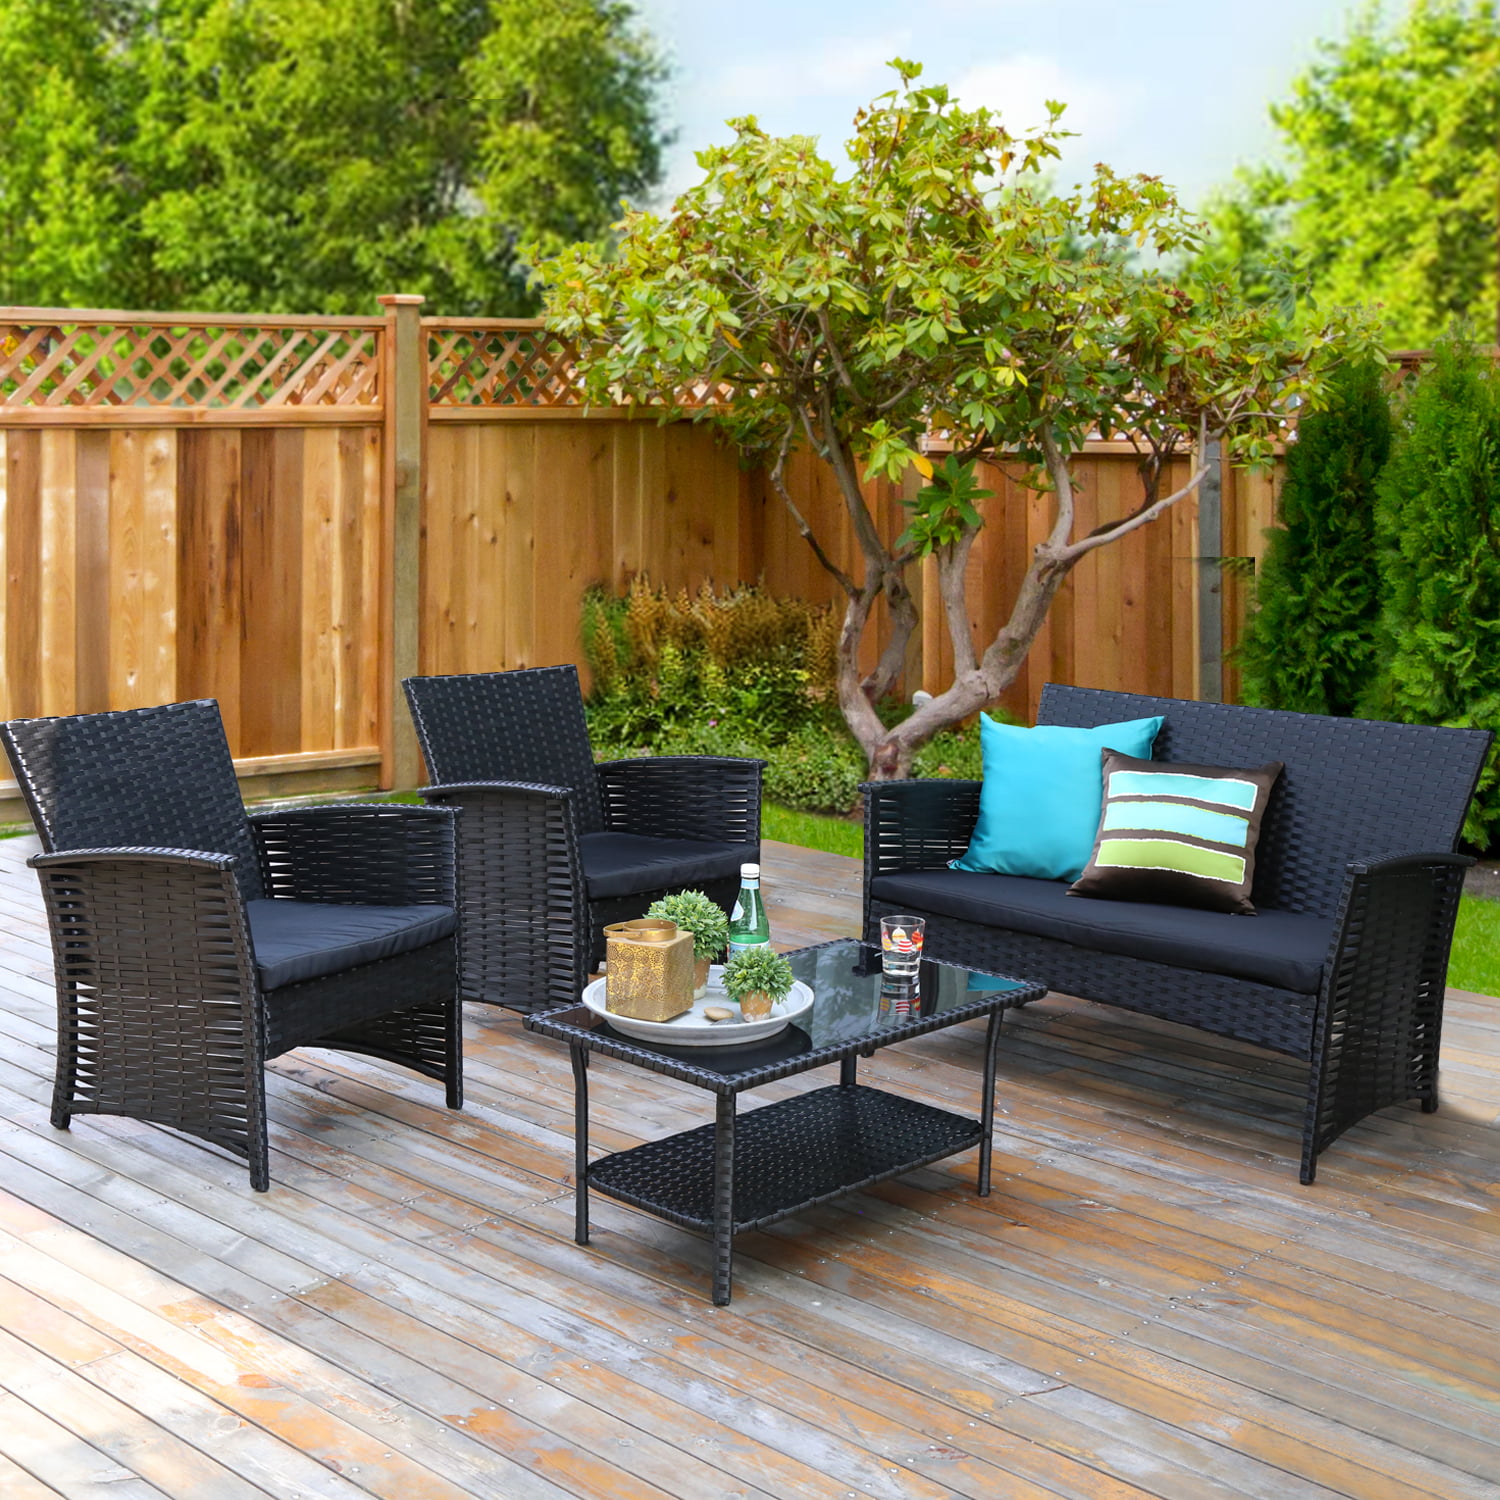 4-Piece Patio Furniture Sets Clearance in Patio & Garden, Outdoor Wicker Sofa Rattan Chair ...